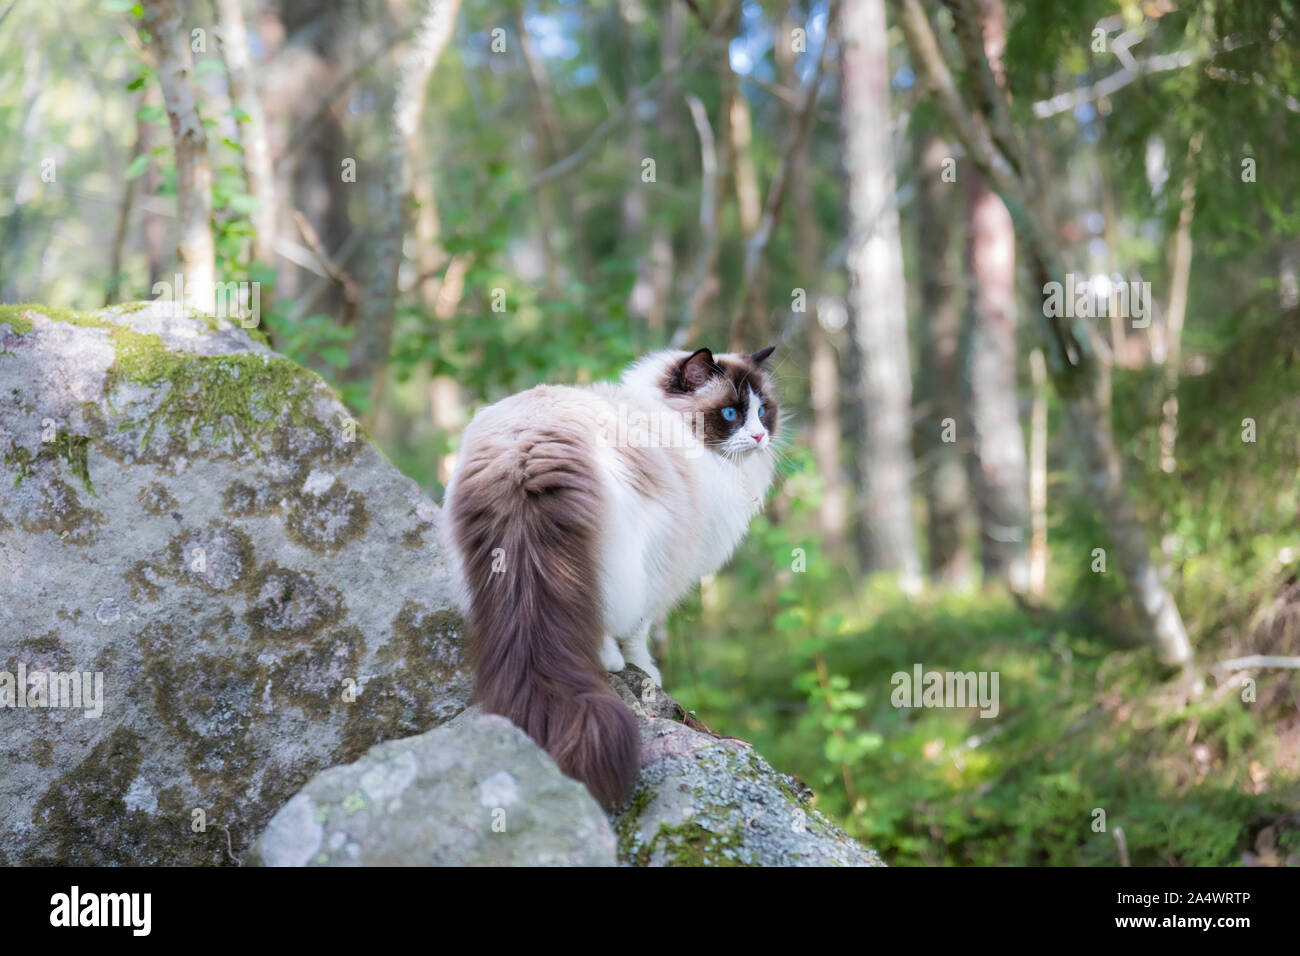 A pretty purebred Ragdoll cat brown bicolor out in the forest. The cat is standing on a rock and is looking out in the woodland. Stock Photo